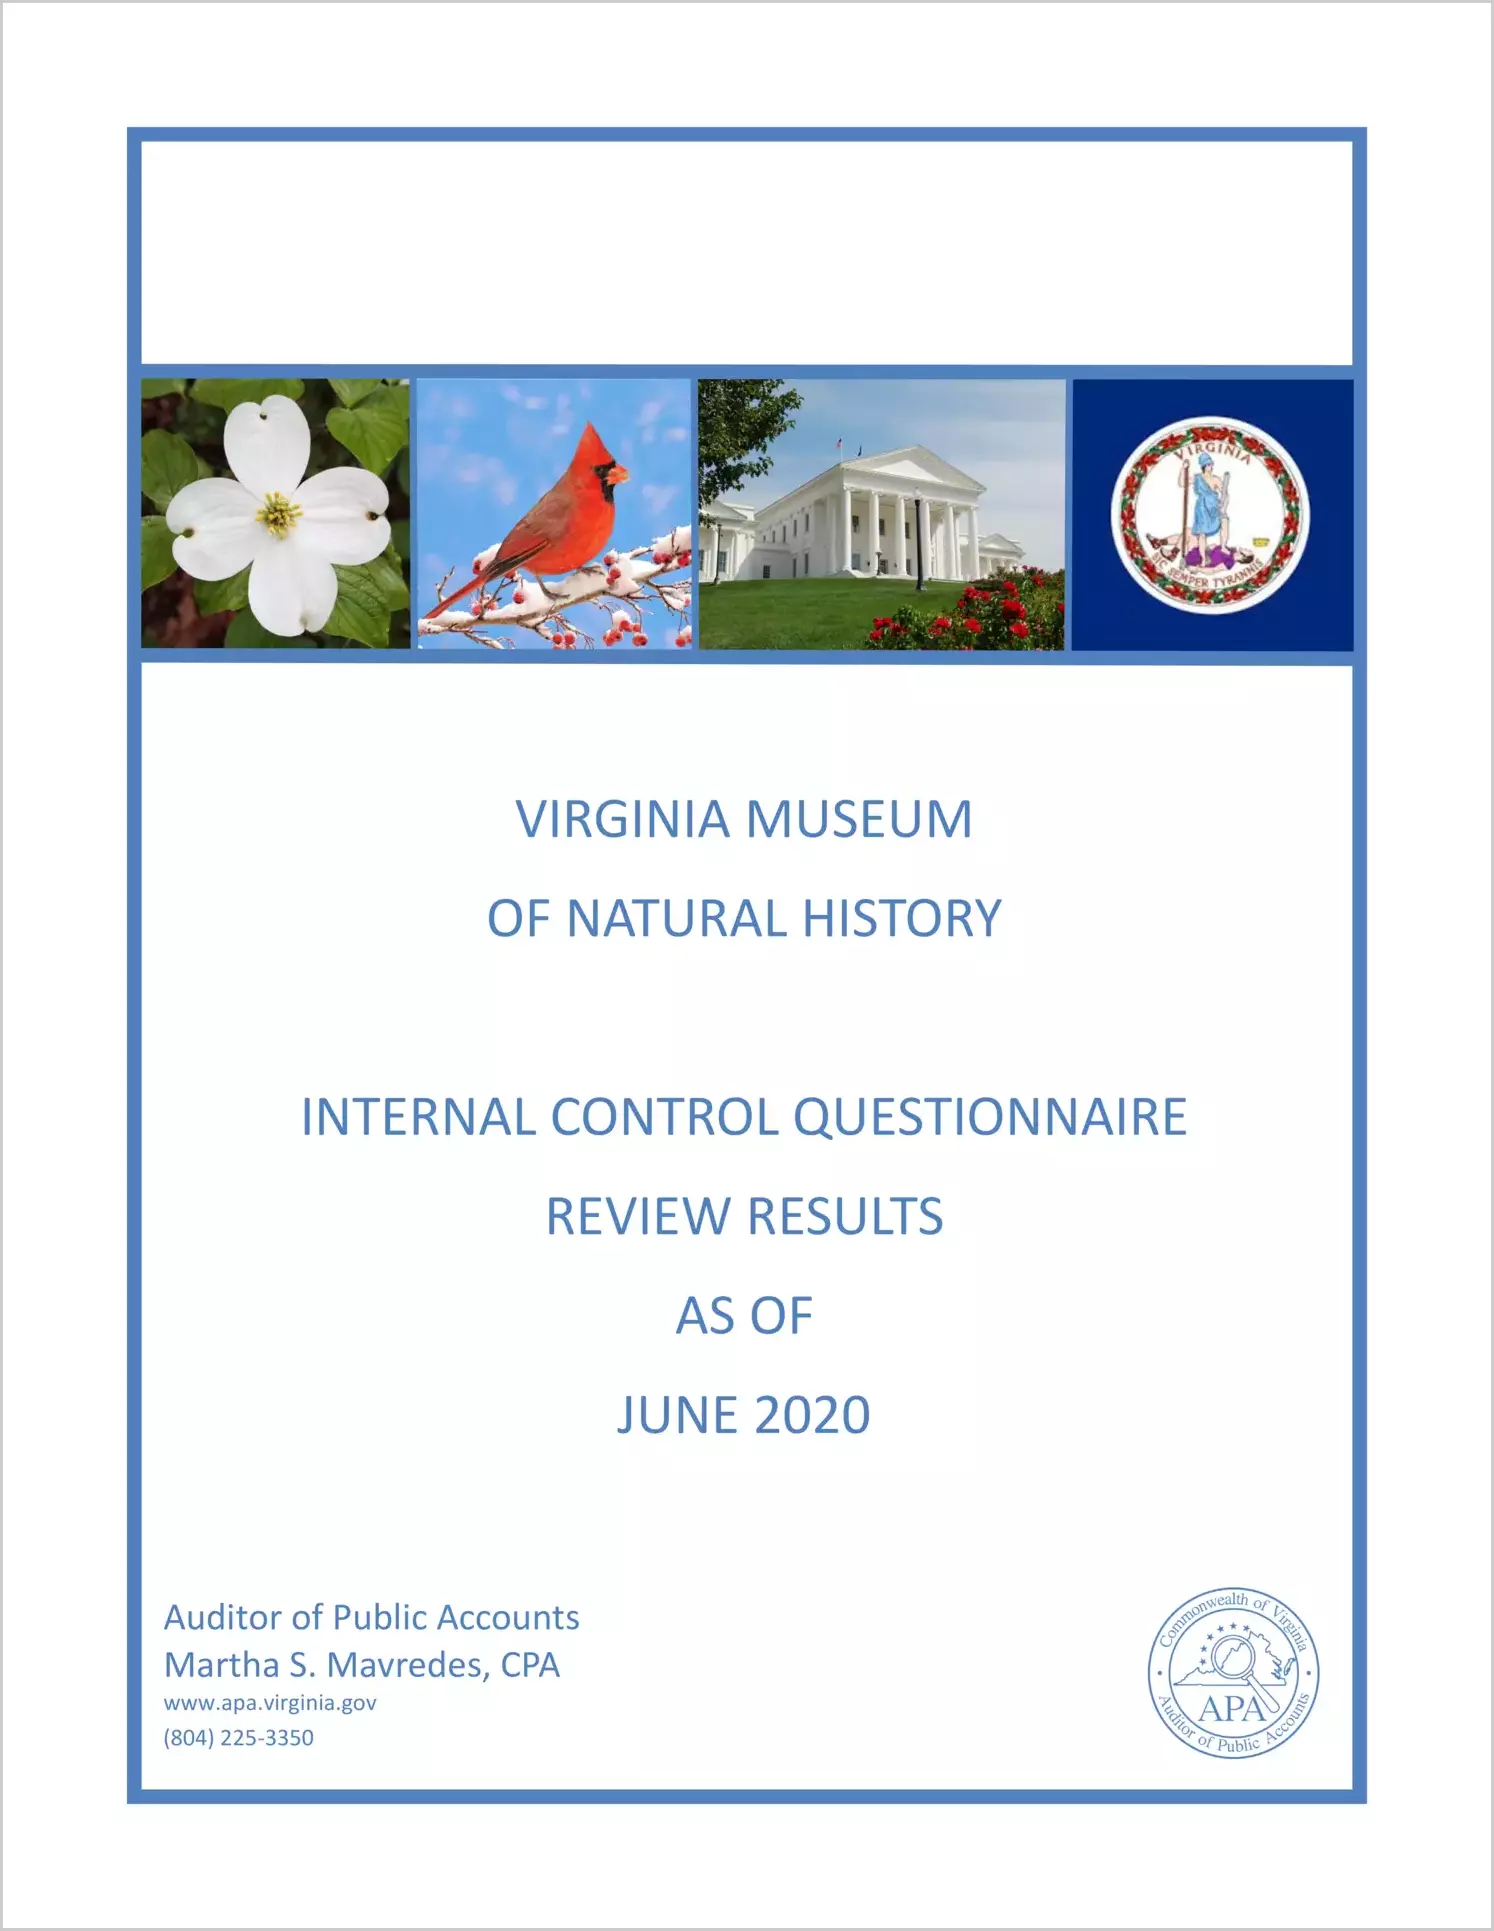 Virginia Museum of Natural History Internal Control Questionnaire Review Results as of June 2020